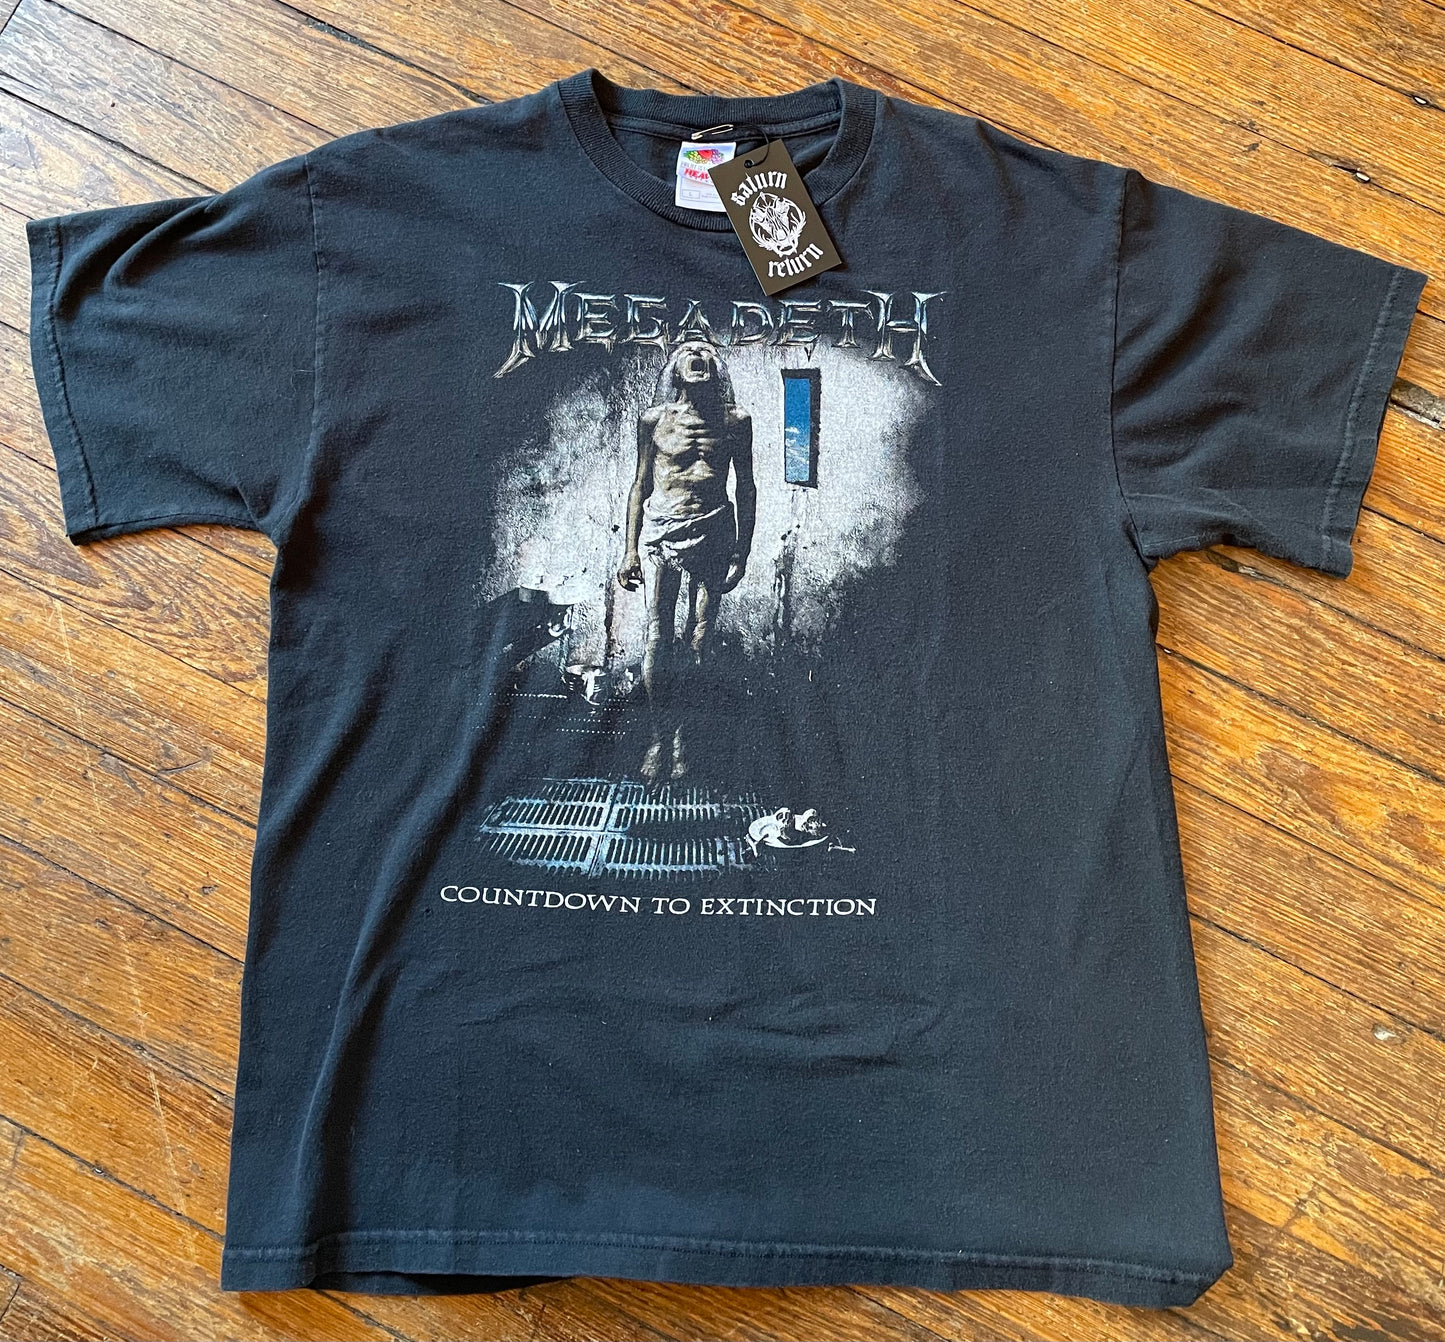 Vintage 90’s/Early 00’s Megadeth Countdown to Extinction T-Shirt